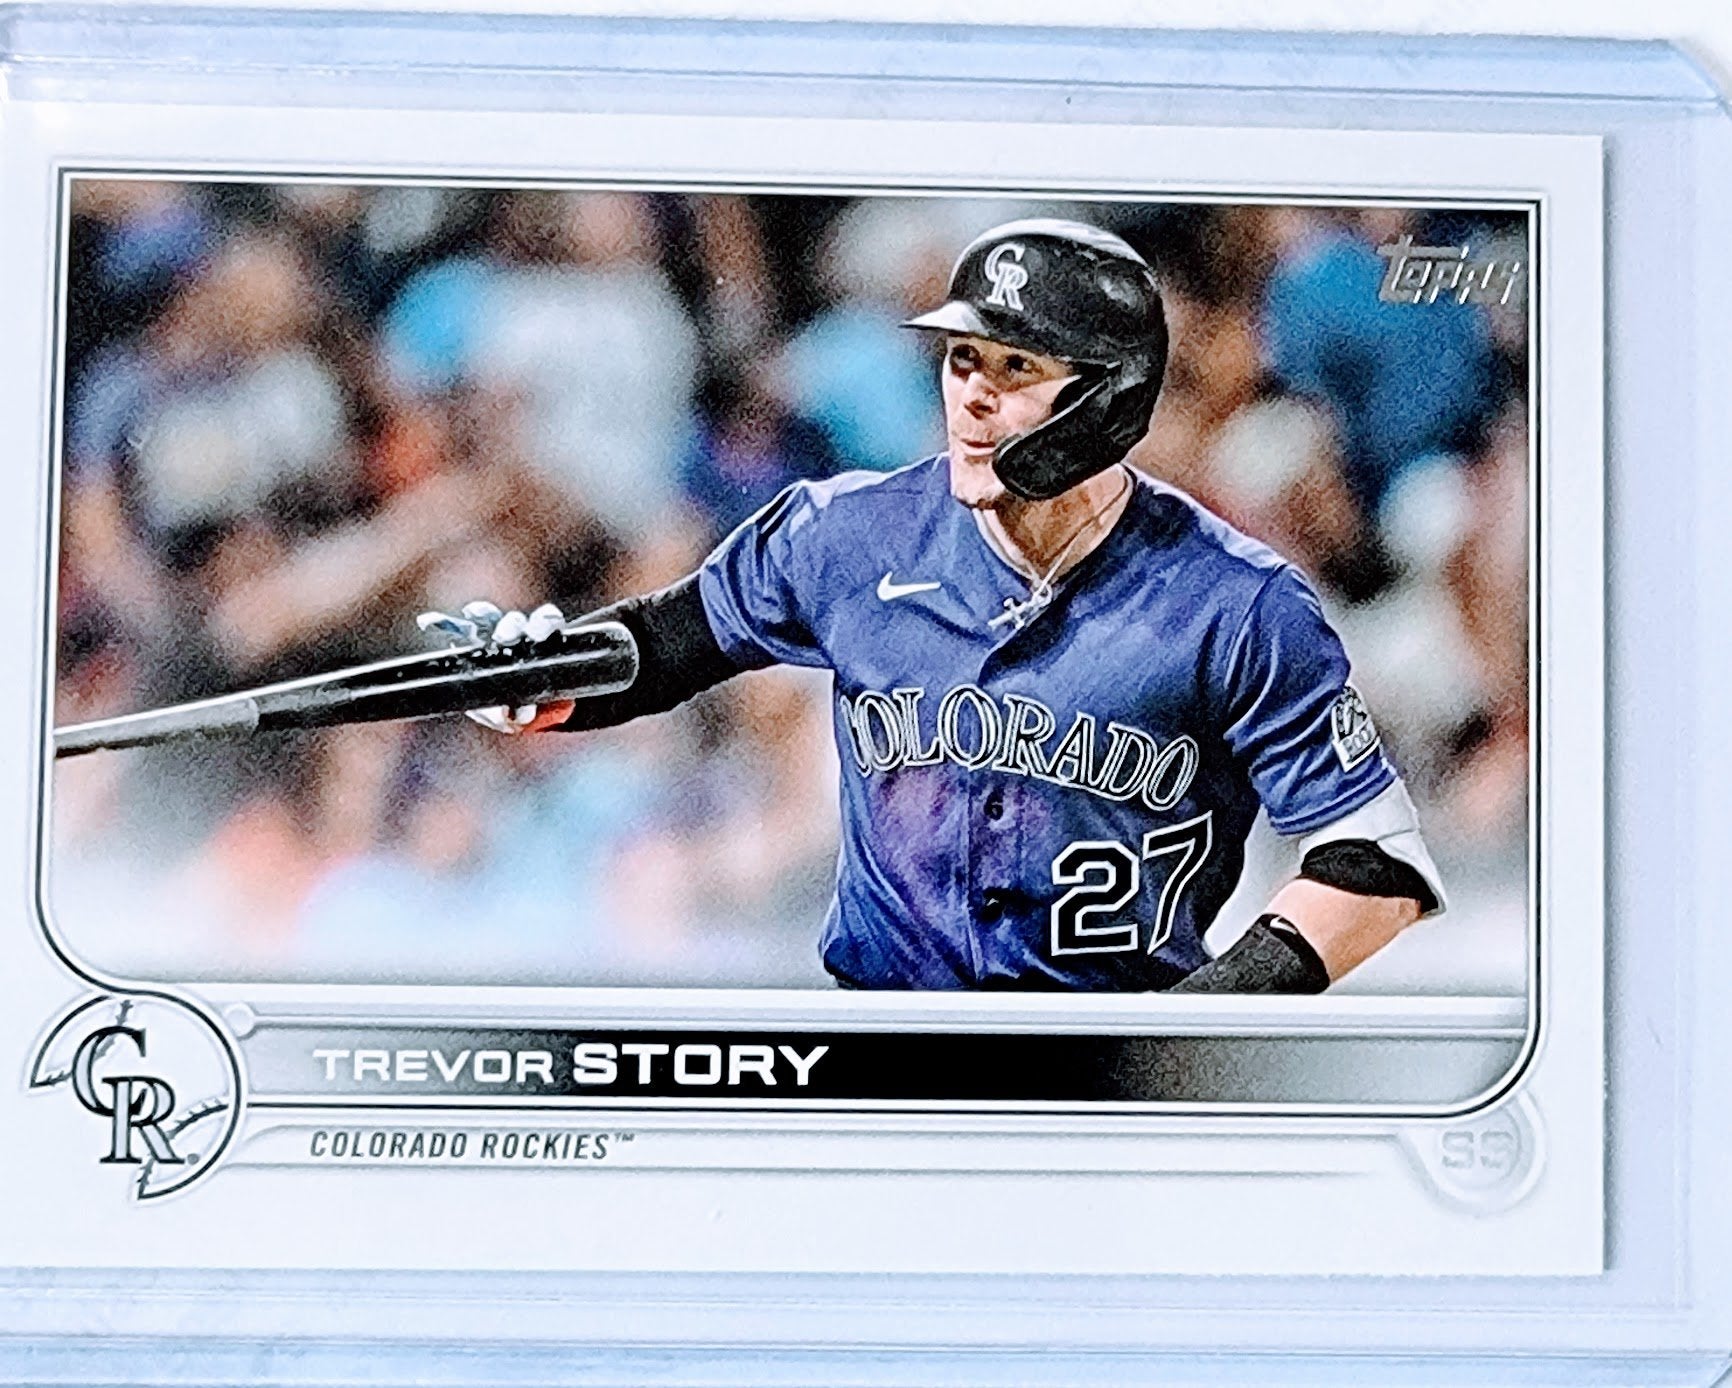 2022 Topps Trevor Story Baseball Trading Card GRB1 simple Xclusive Collectibles   